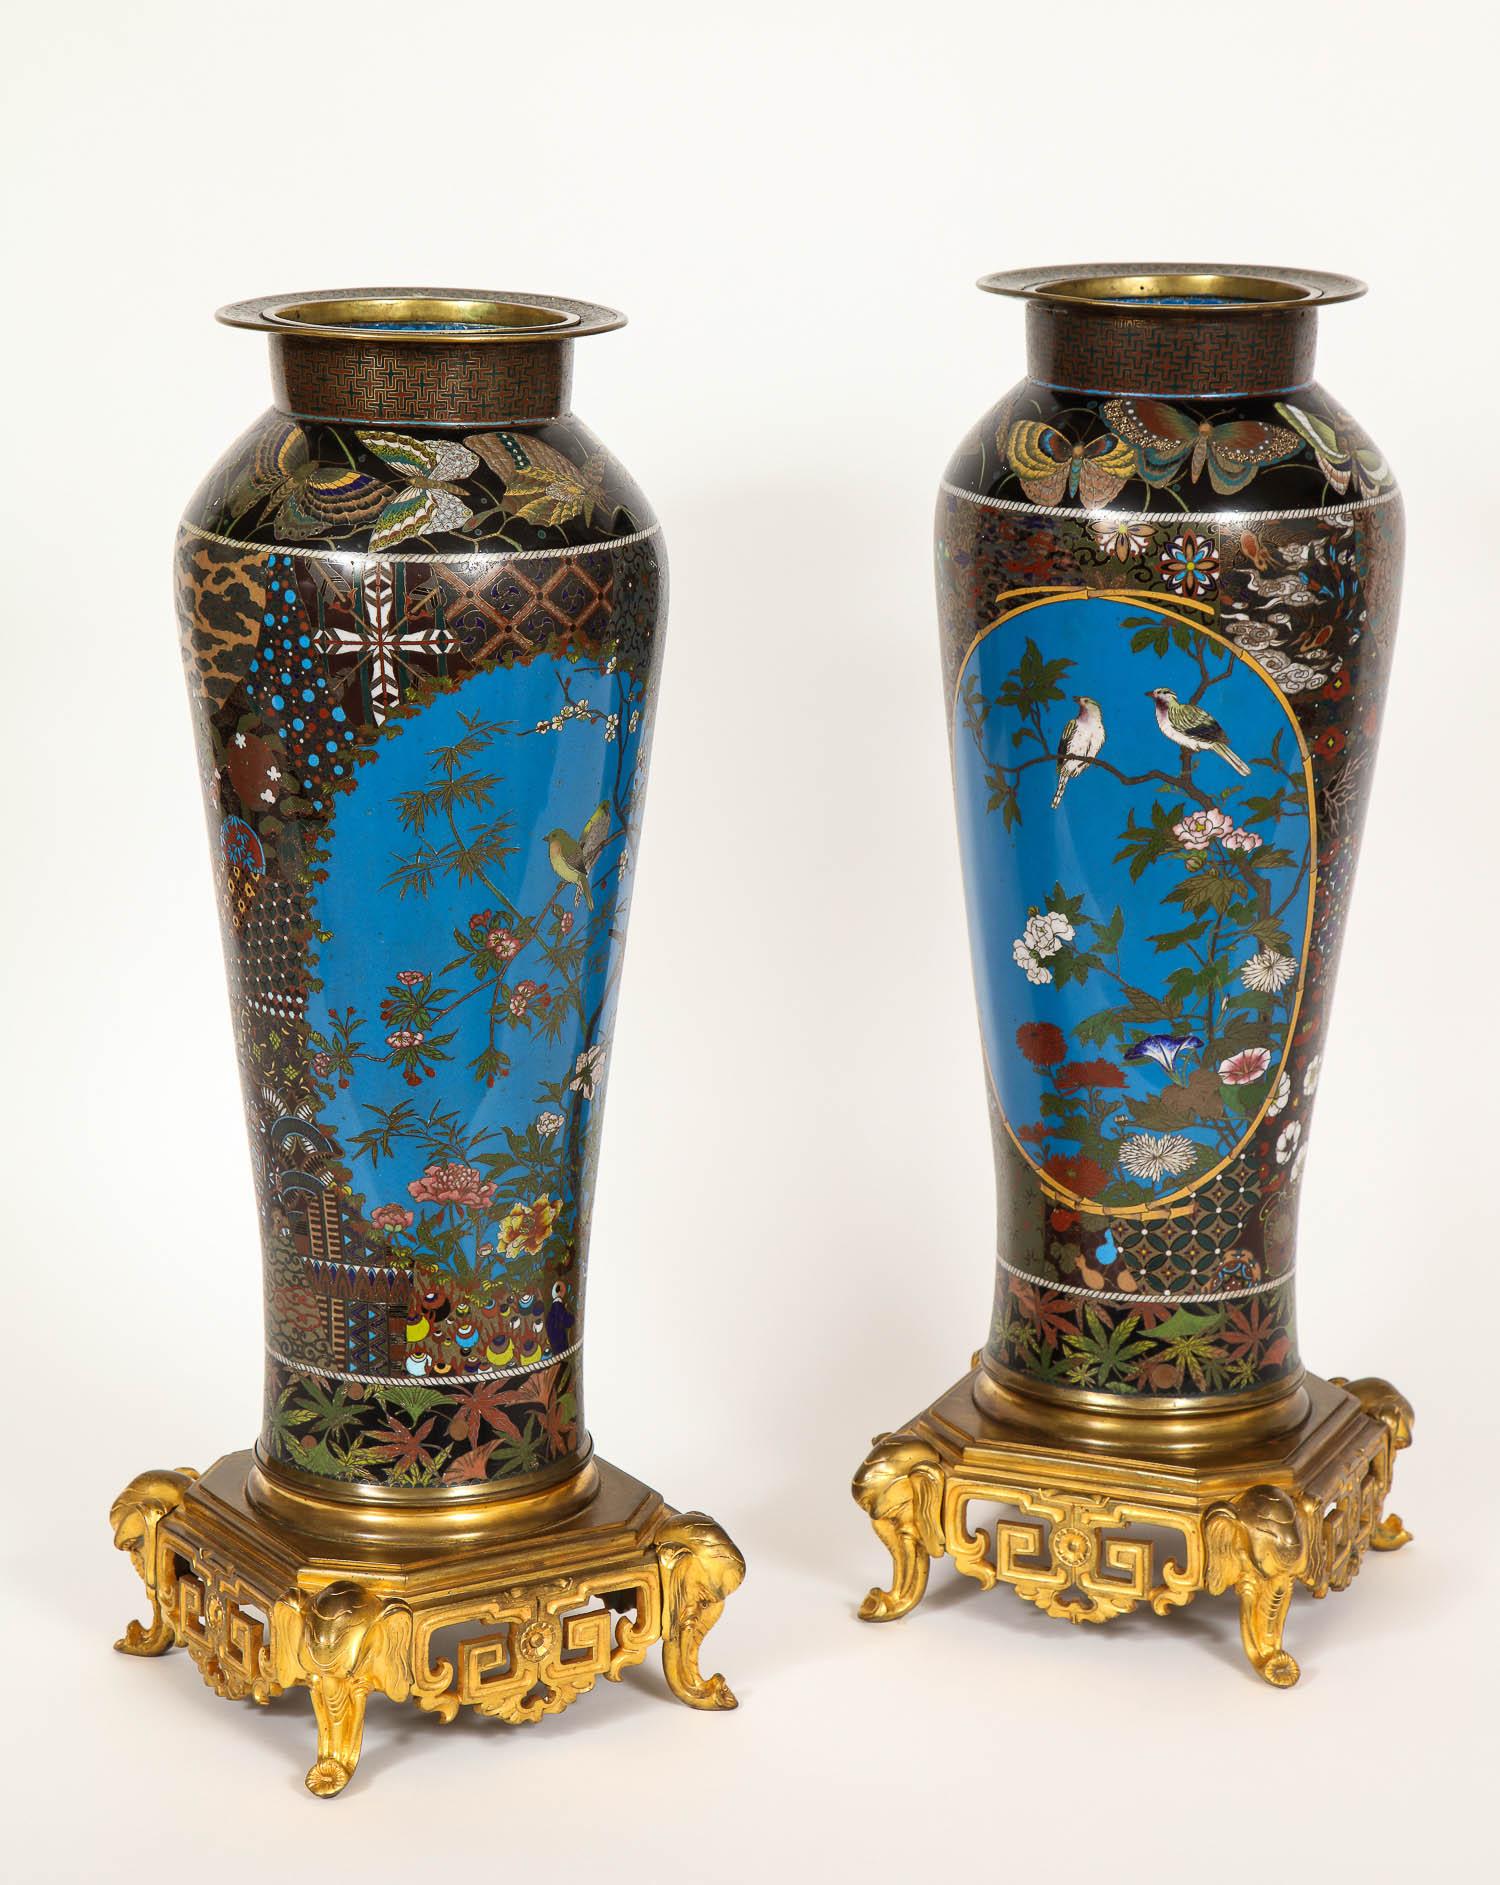 Bronze Pair of Meji Period Japanese Cloisonne Thousand Butterfly Vases, Barbedienne